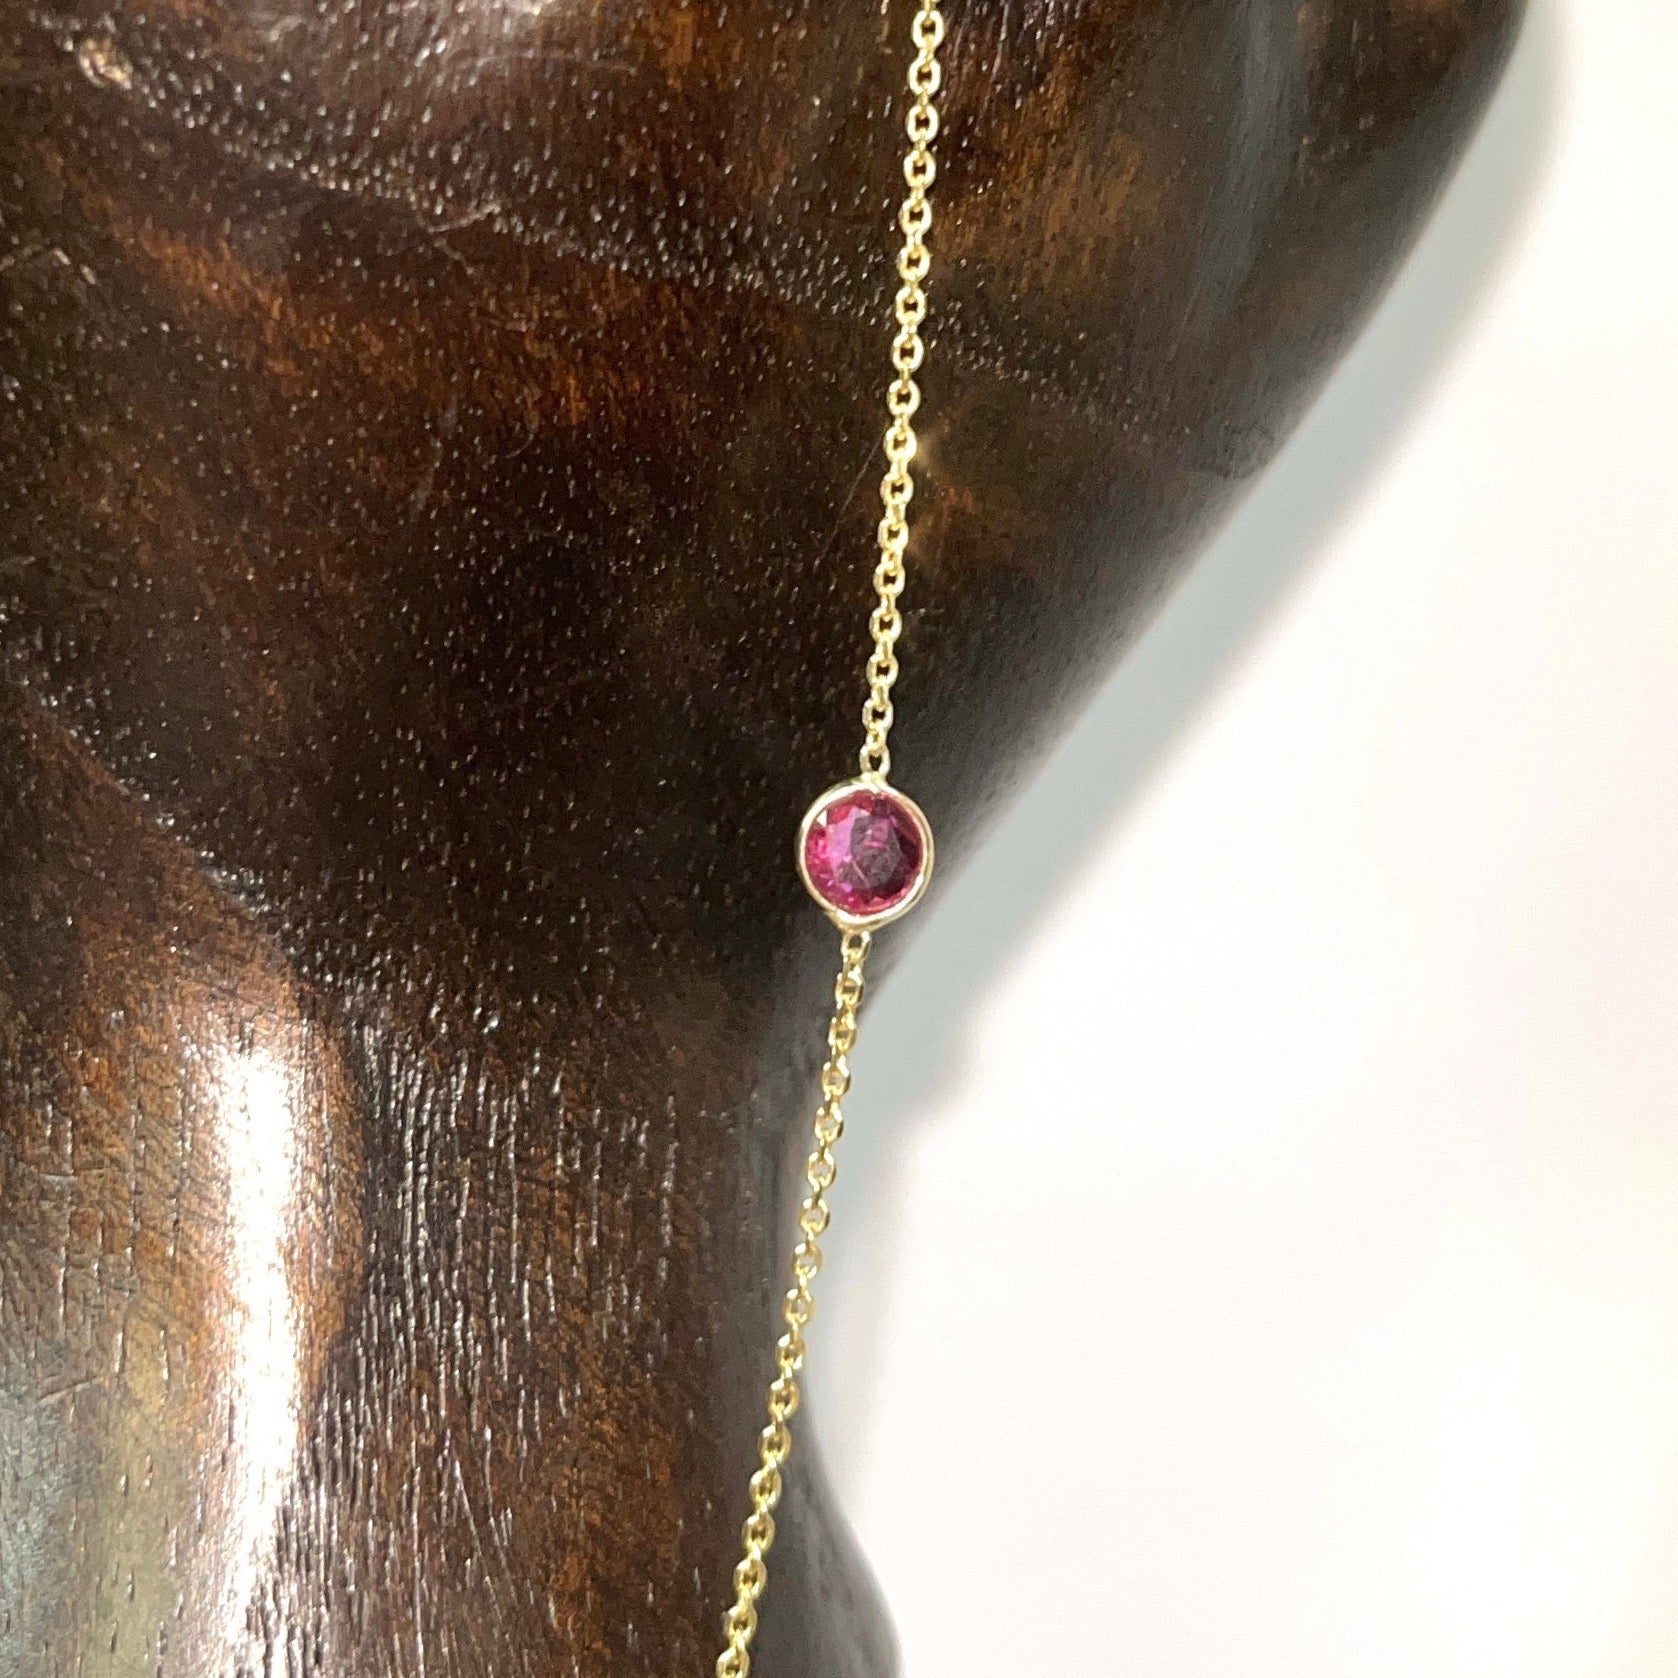 Round Ruby Hand Chain Bracelet in Solid 14K Yellow Gold